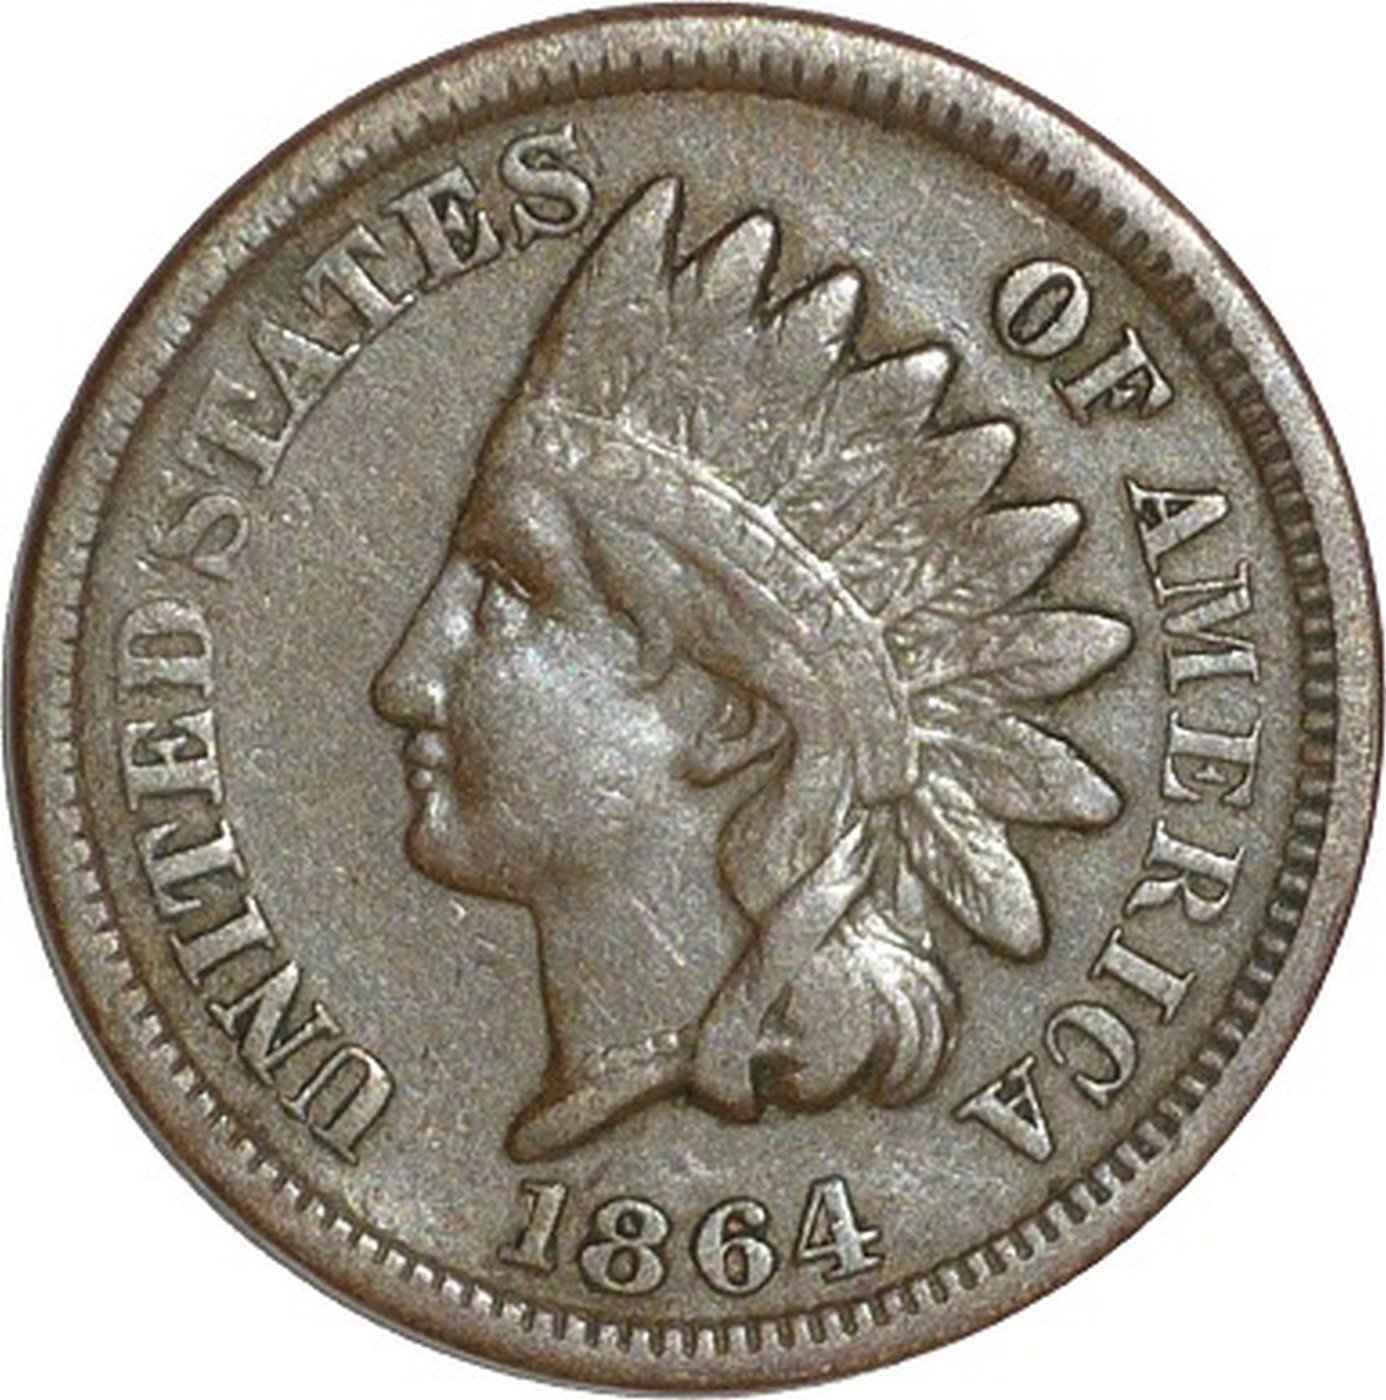 1864 No-L ROT-001 - Indian Head Penny - Photo by David Poliquin